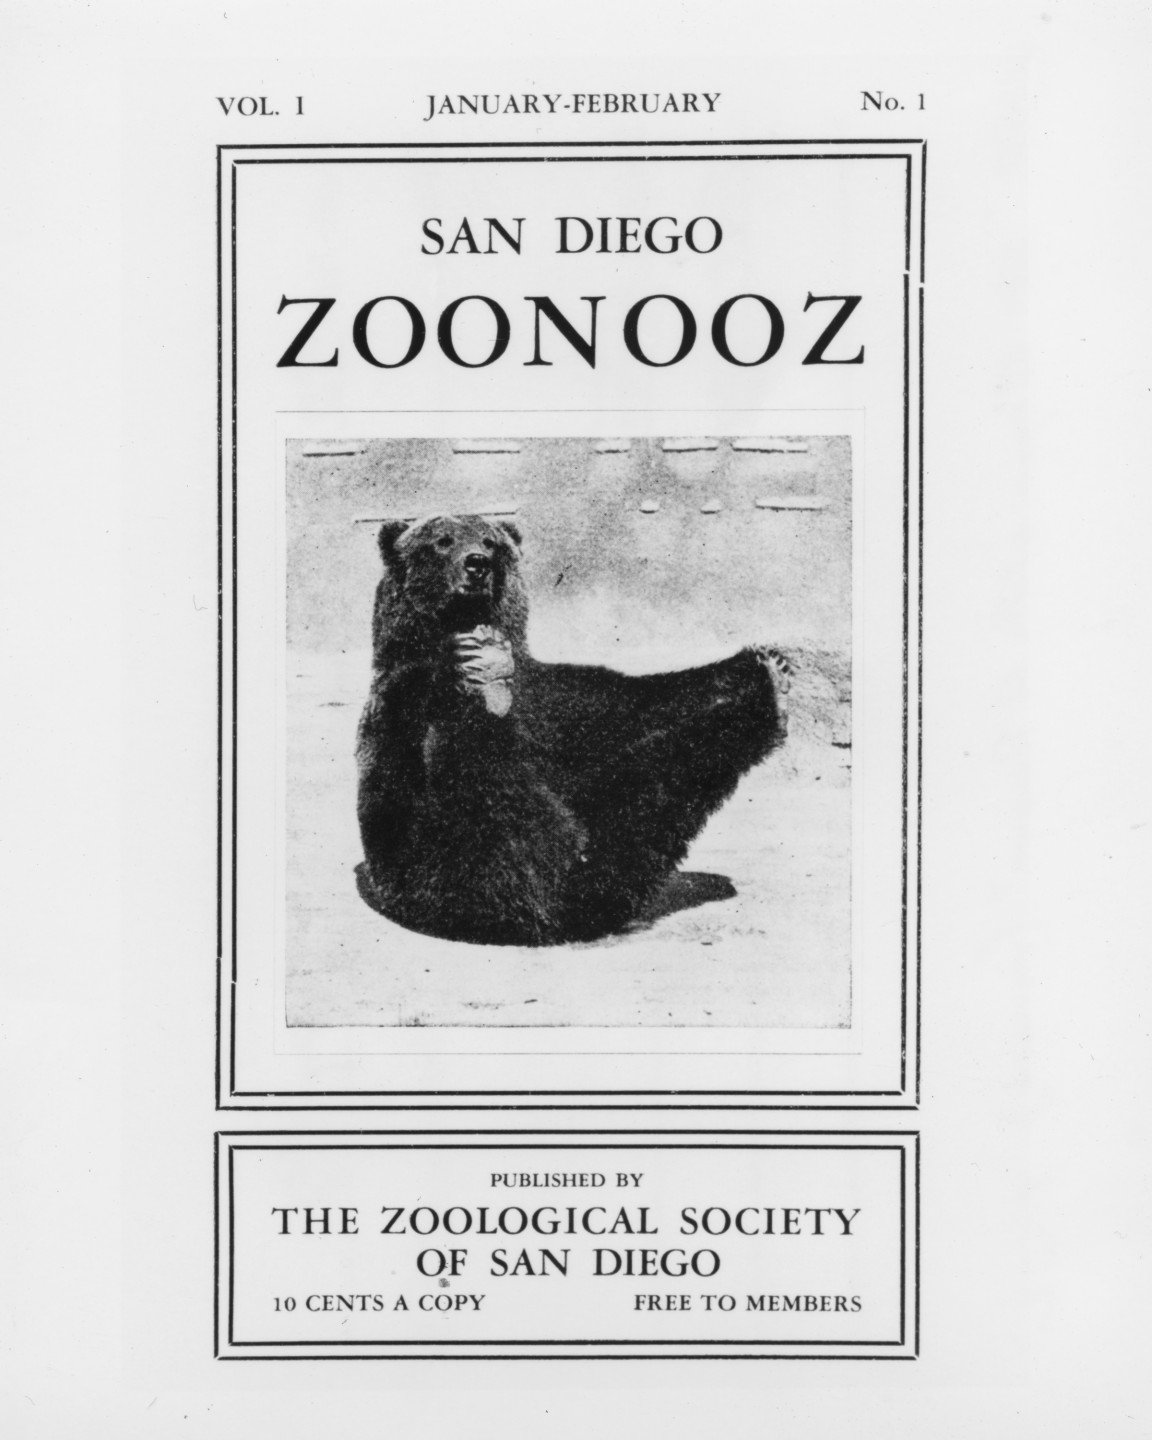 First issue of ZOONOOZ magazine